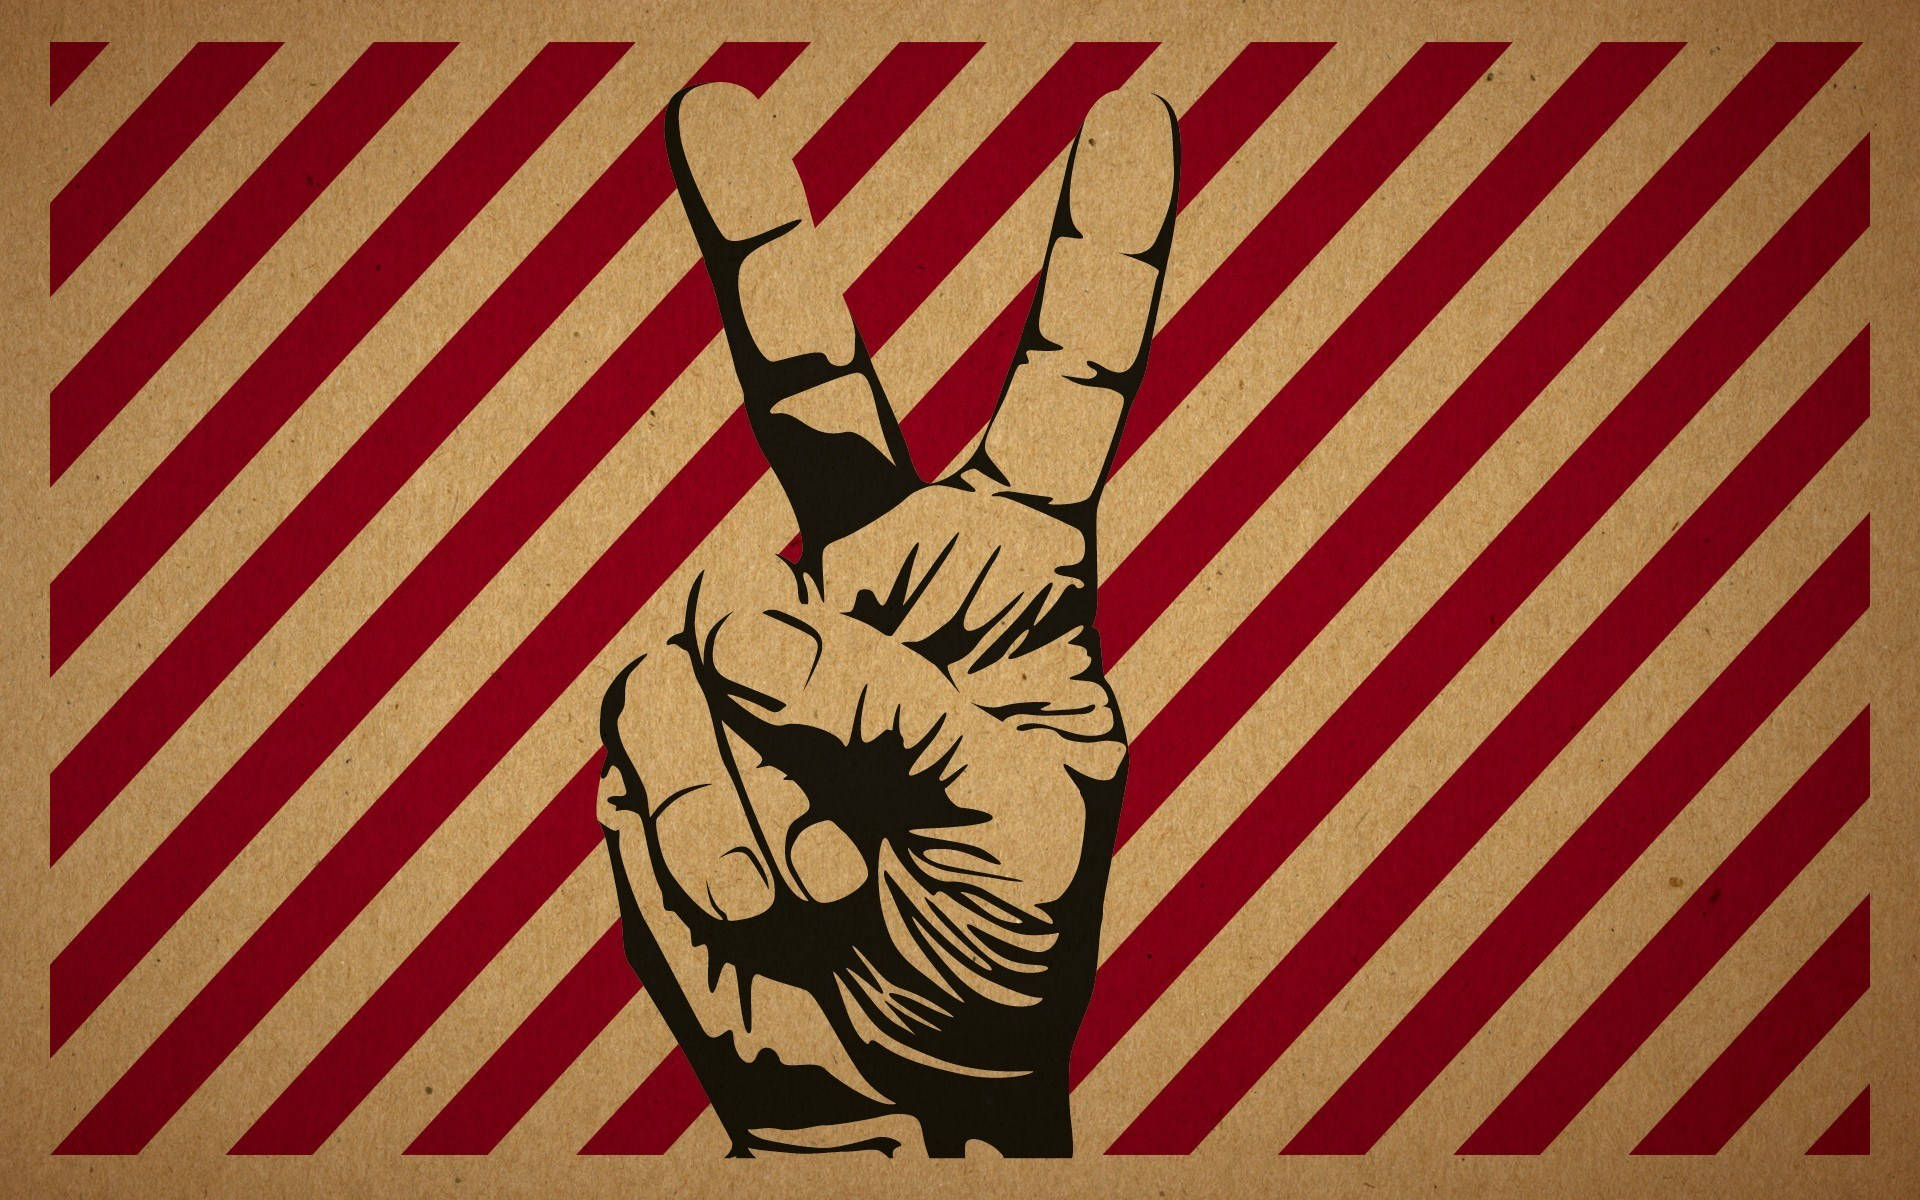 Retro Peace Hand Sign Background